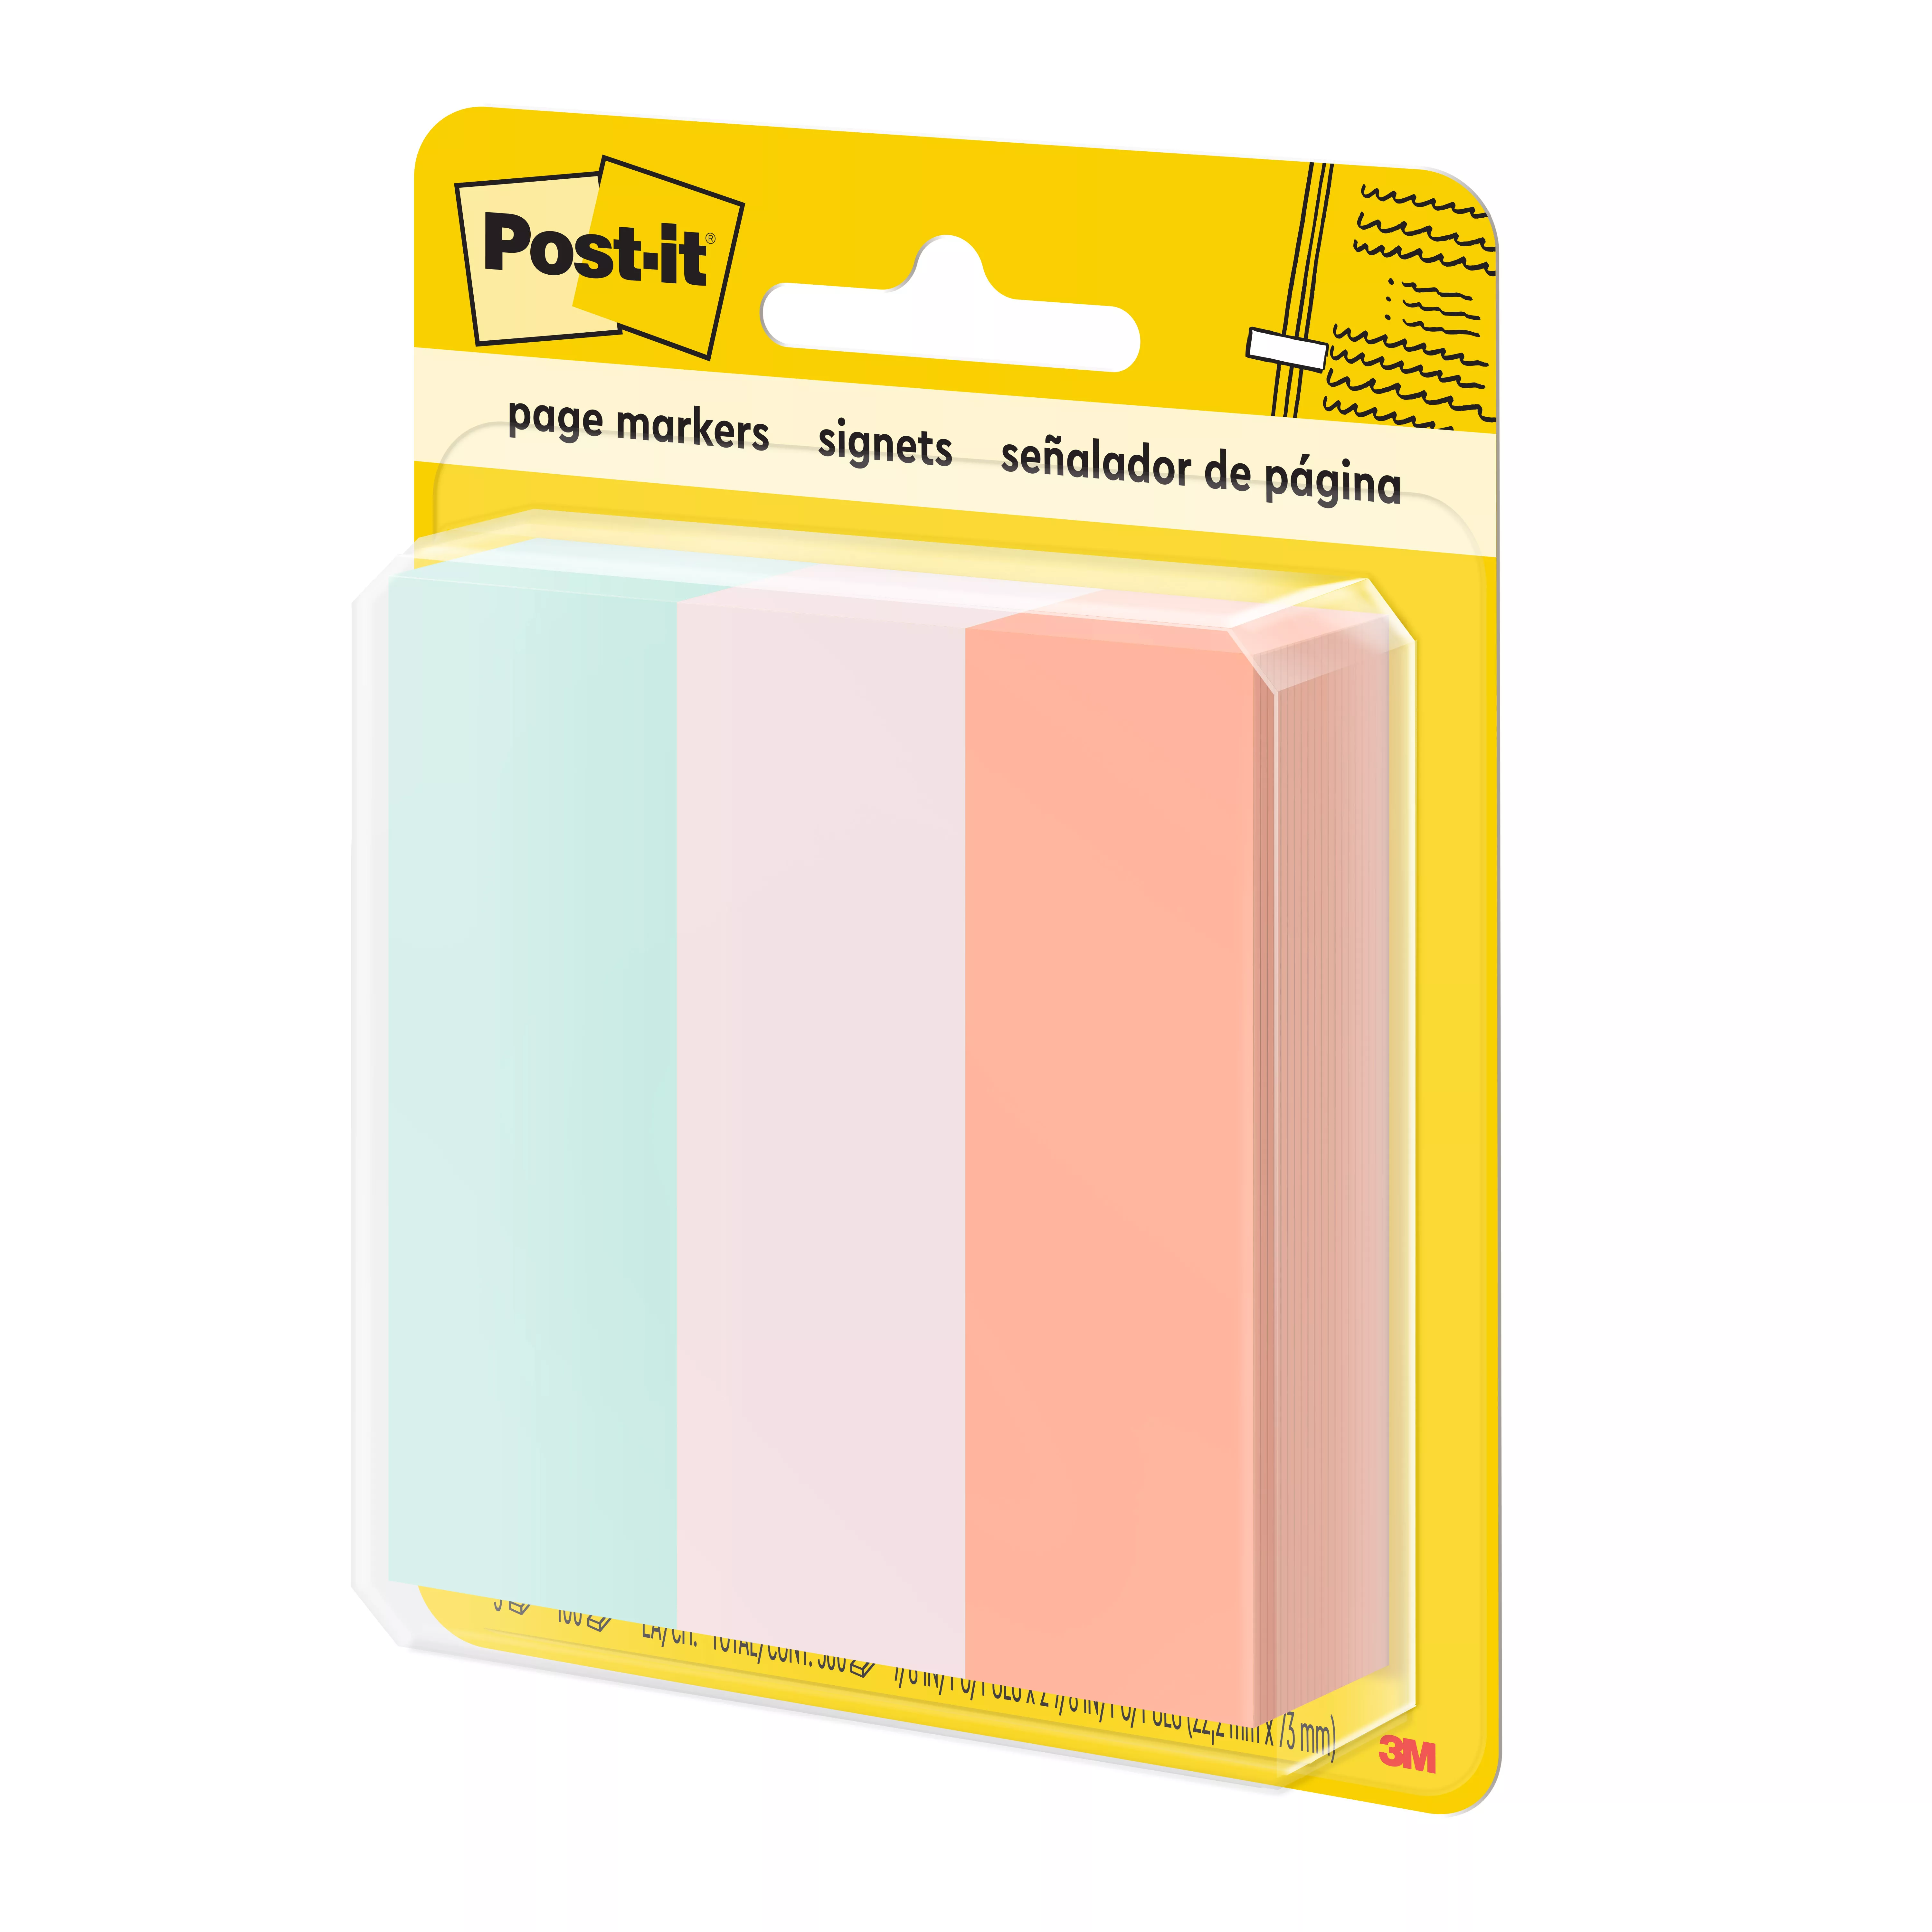 UPC 00021200569036 | Post-it® Page Markers 5487 7/8 in x 2-7/8 in Neon 100sht/pd